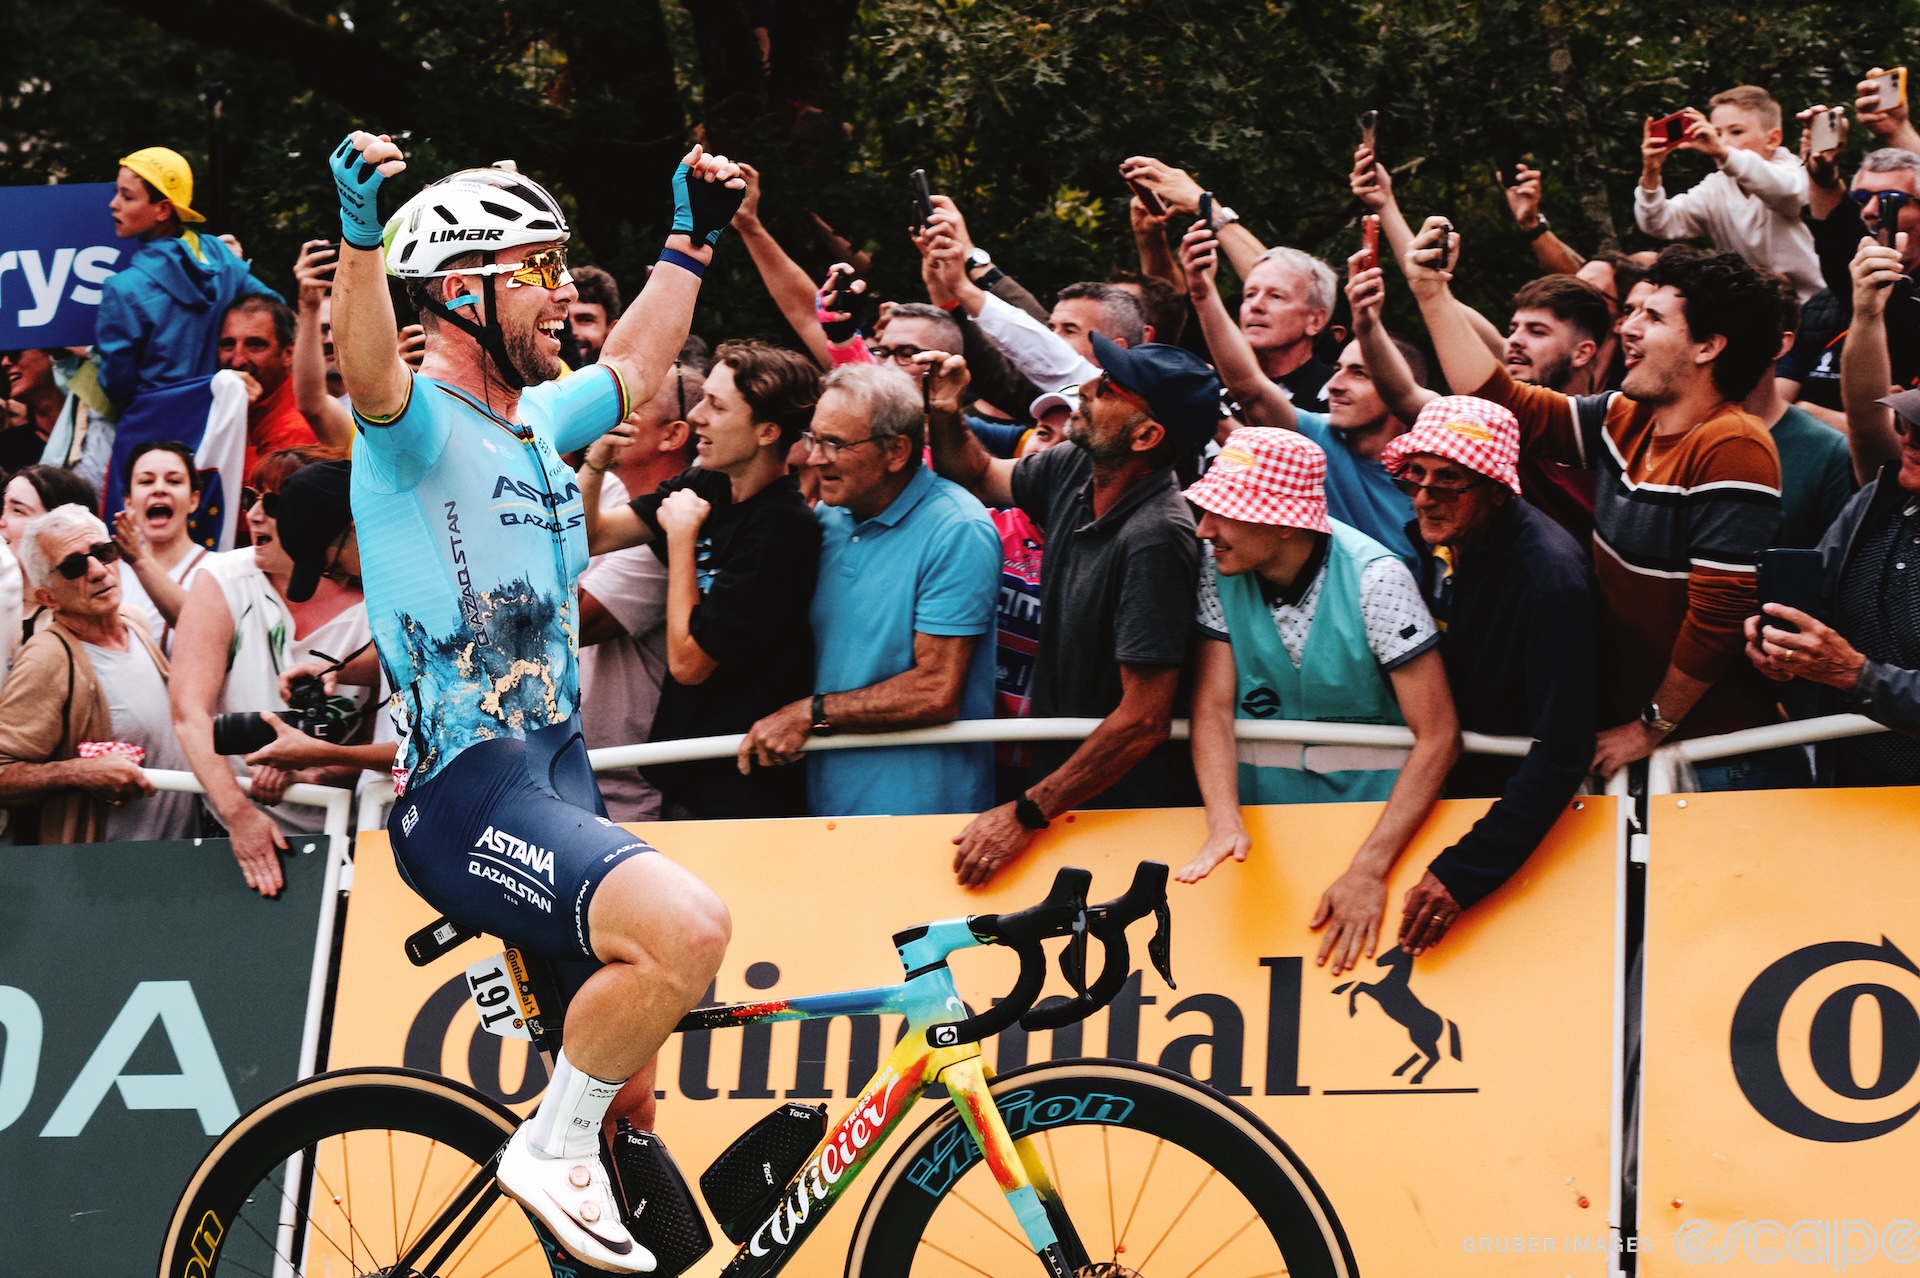 Mark Cavendish raises his hands as he crosses the finish line to win stage 5 of the 2024 Tour de France. He's shown alone, in profile, a wide smile breaking out on his face as fans slap the barriers and cheer.